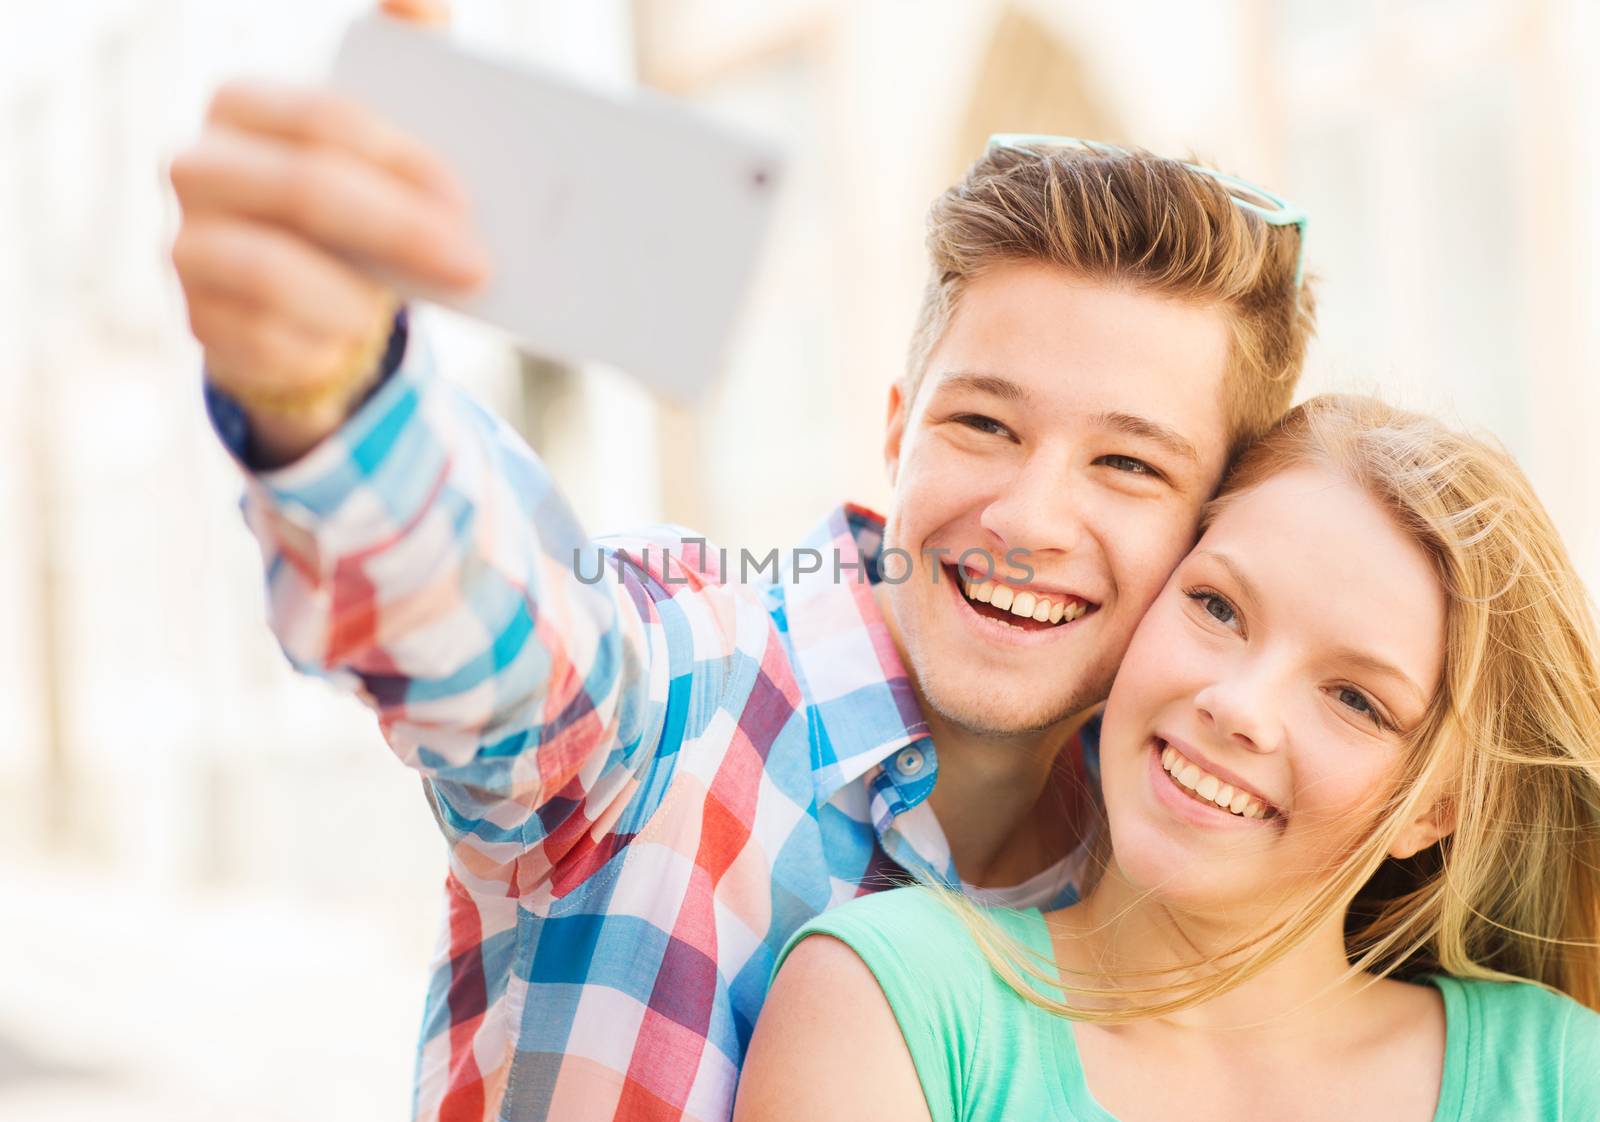 smiling couple with smartphone in city by dolgachov